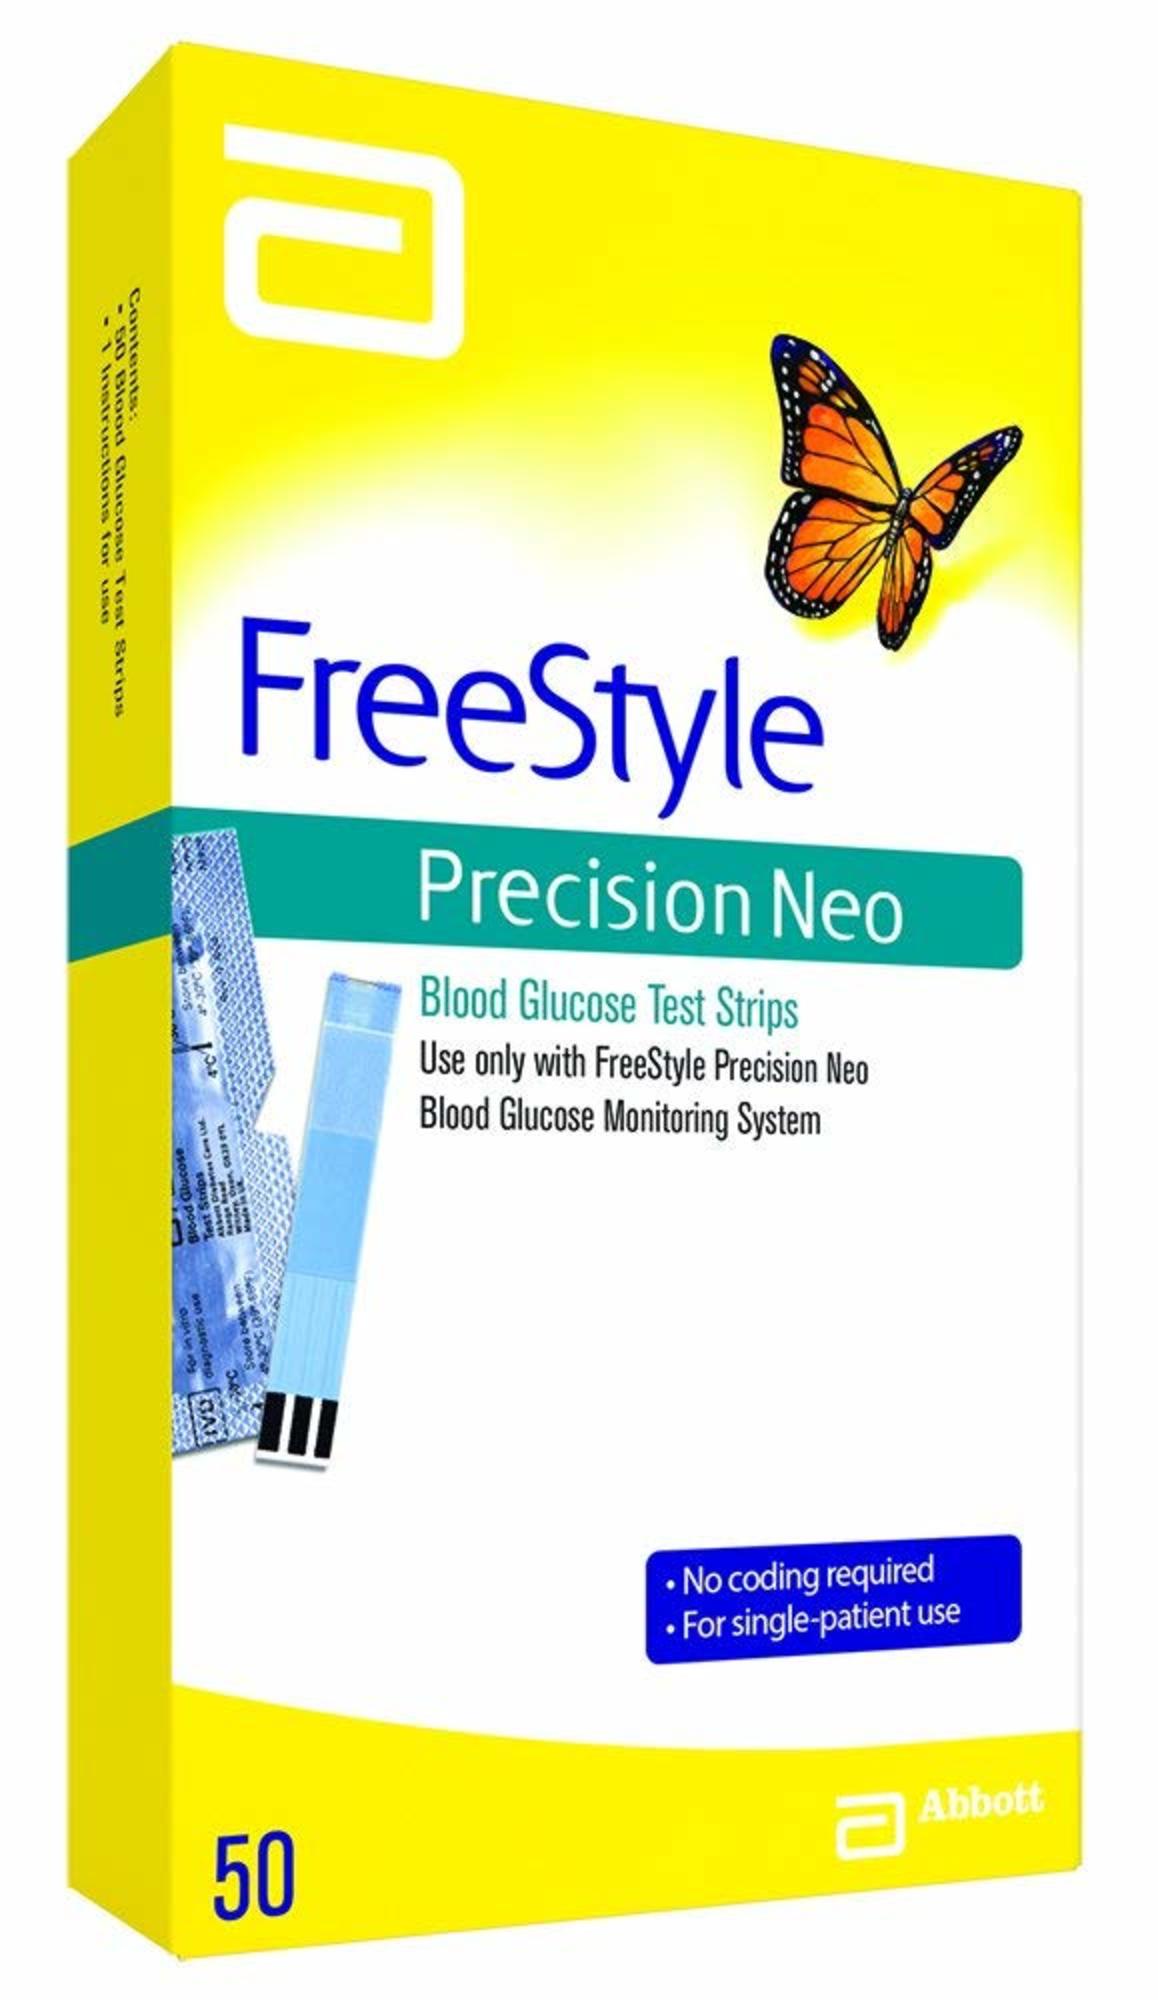 FreeStyle Precision Neo Blood Glucose Test Strips, 50 Count - image 4 of 4